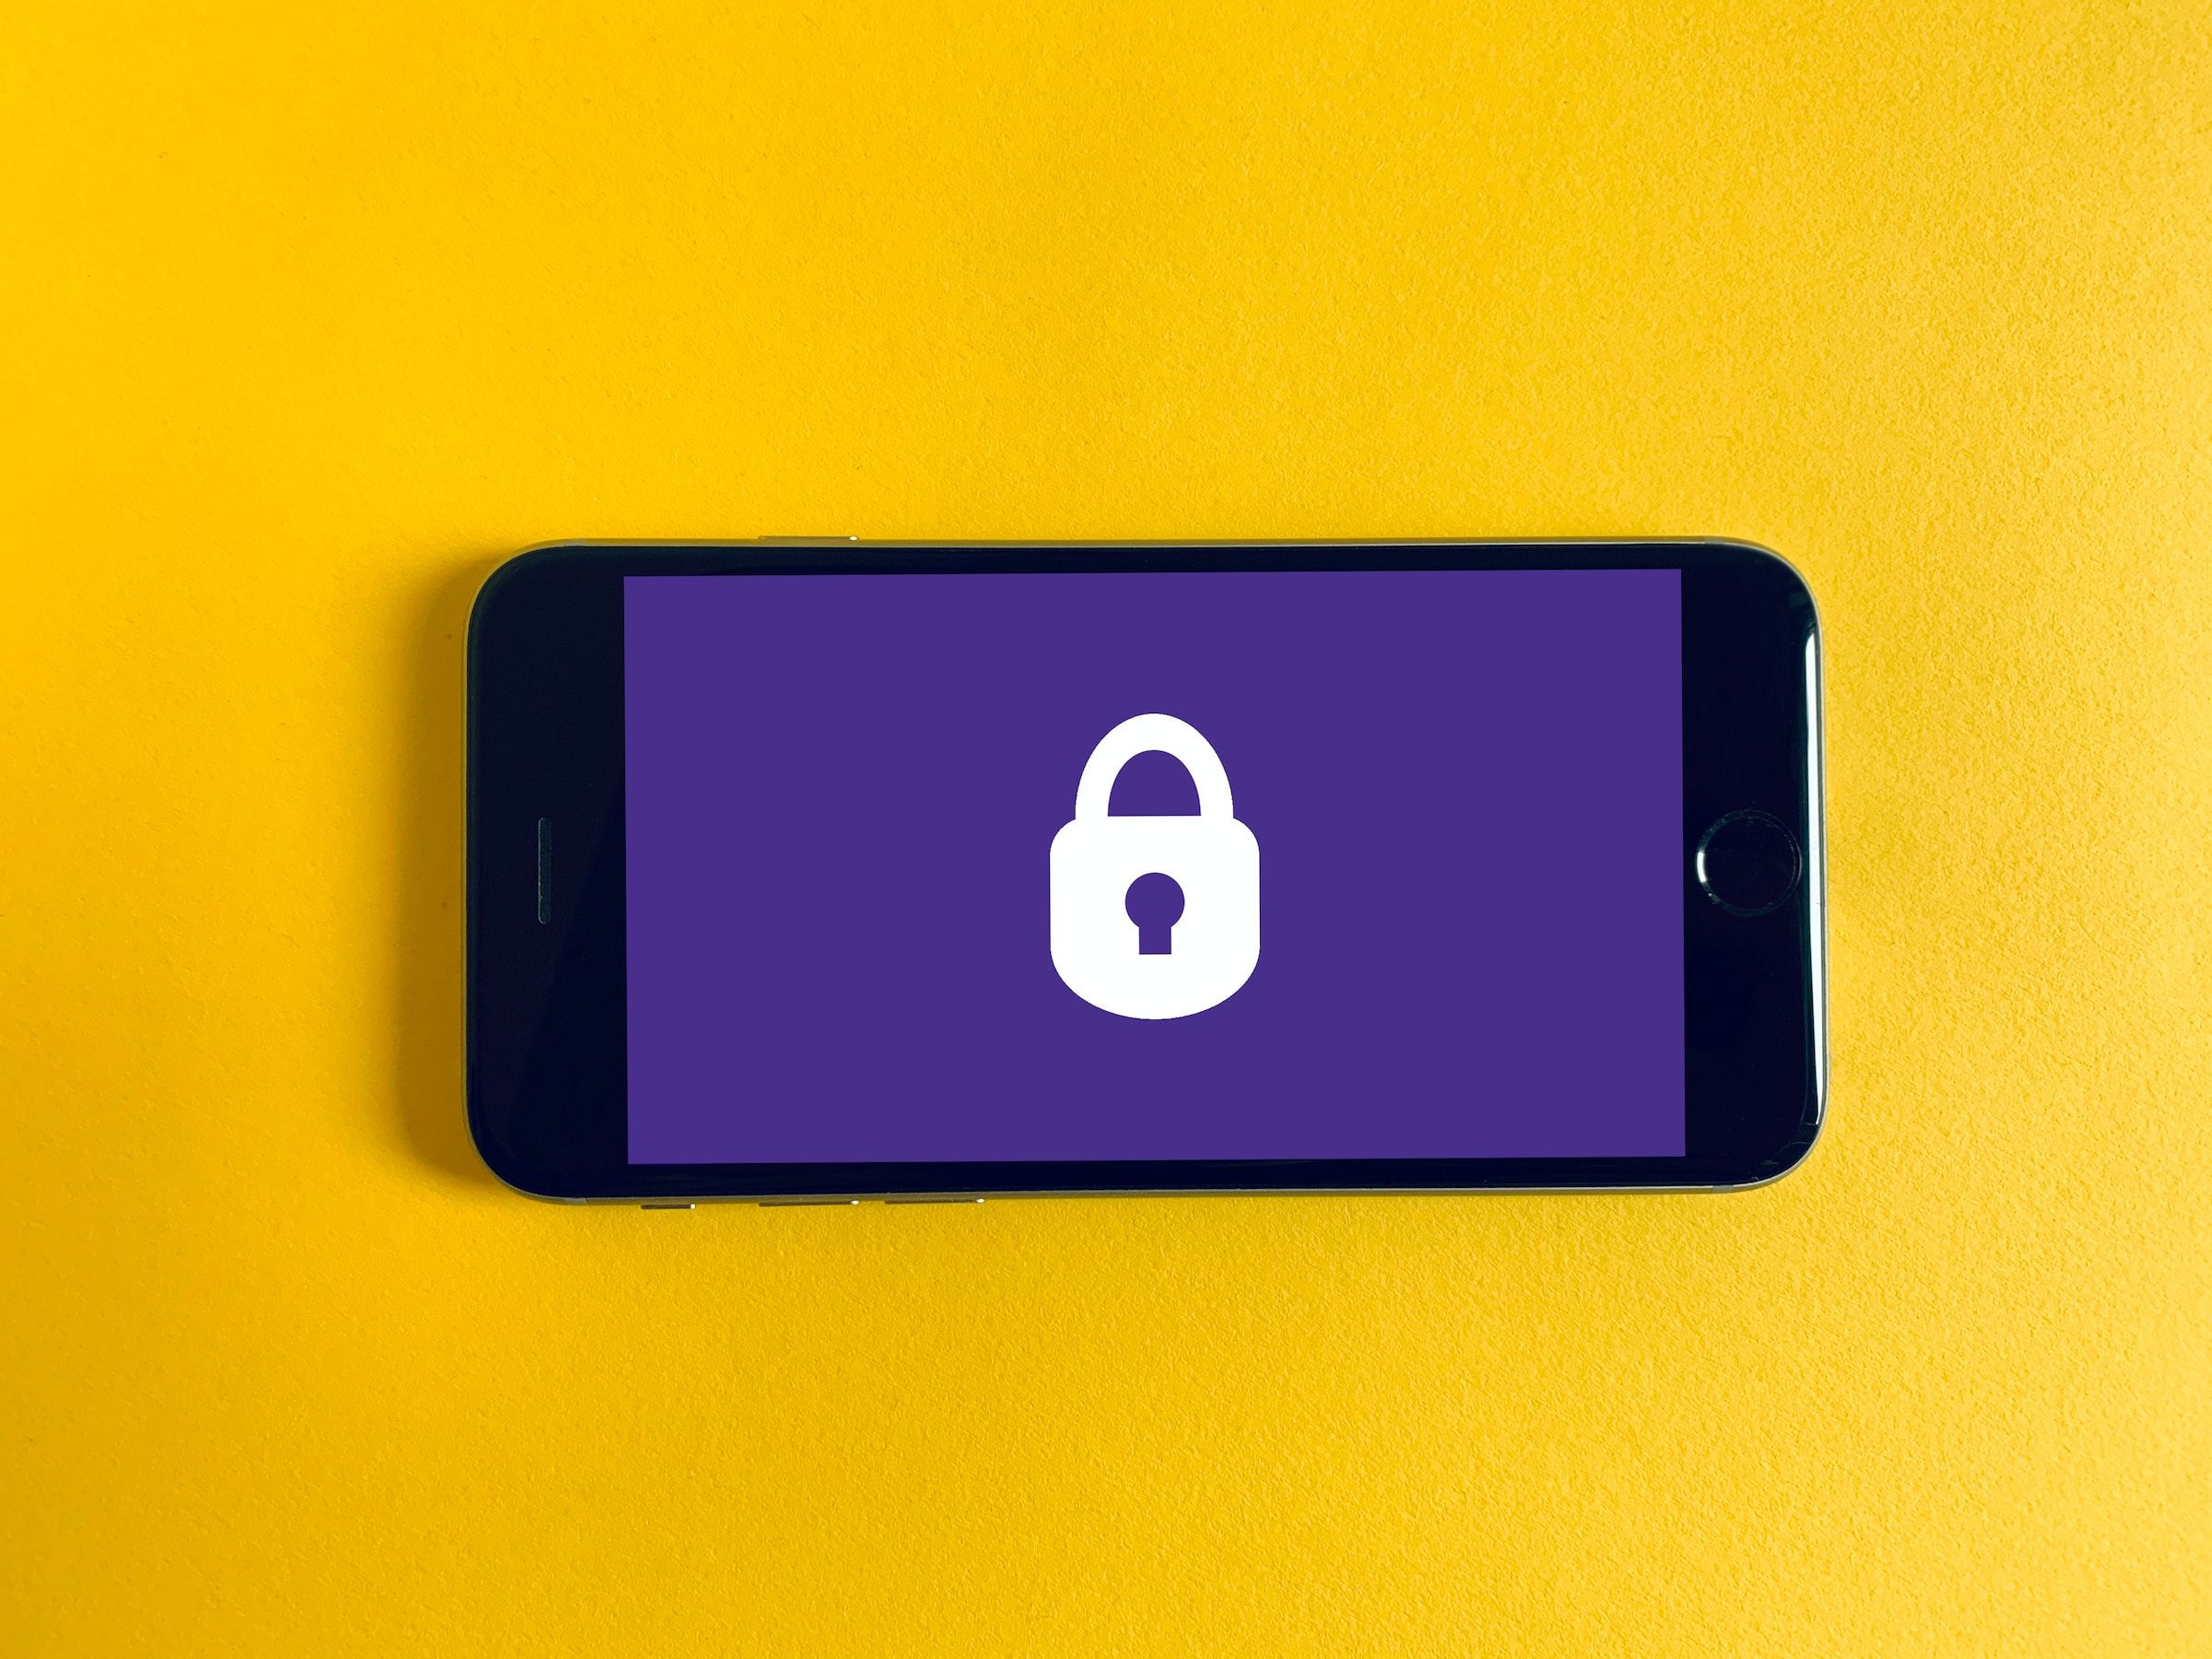 An iPhone showing an image of lock, depicting safety.